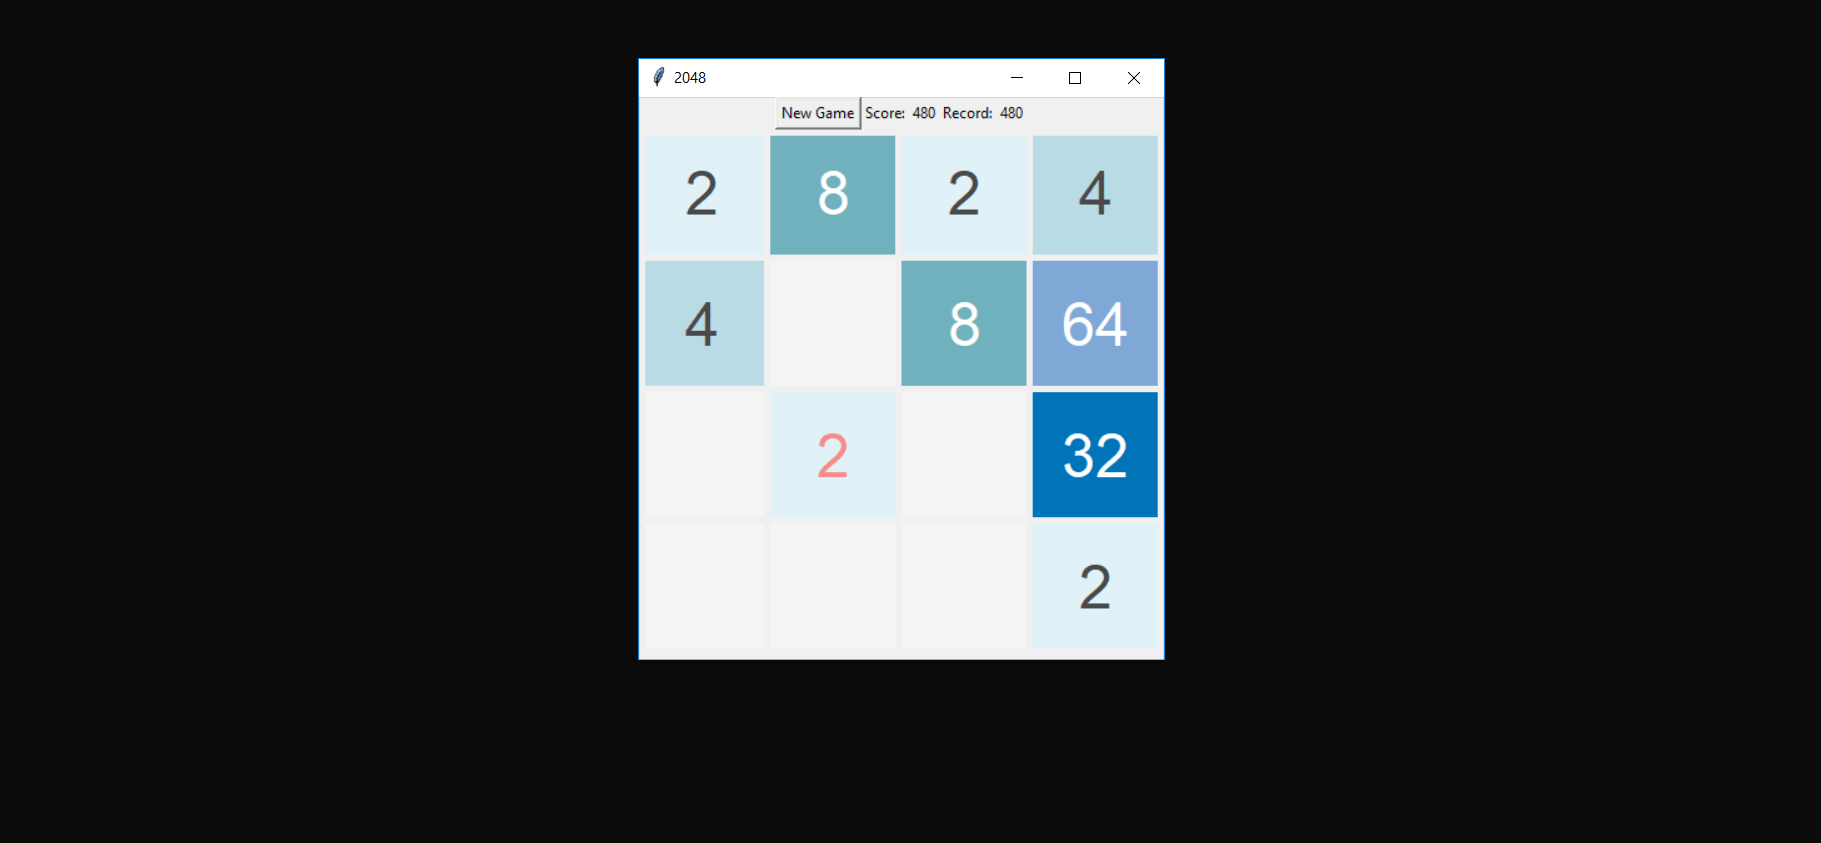 Screenshot 118 - SIMPLE 2048 GAME IN PYTHON WITH SOURCE CODE